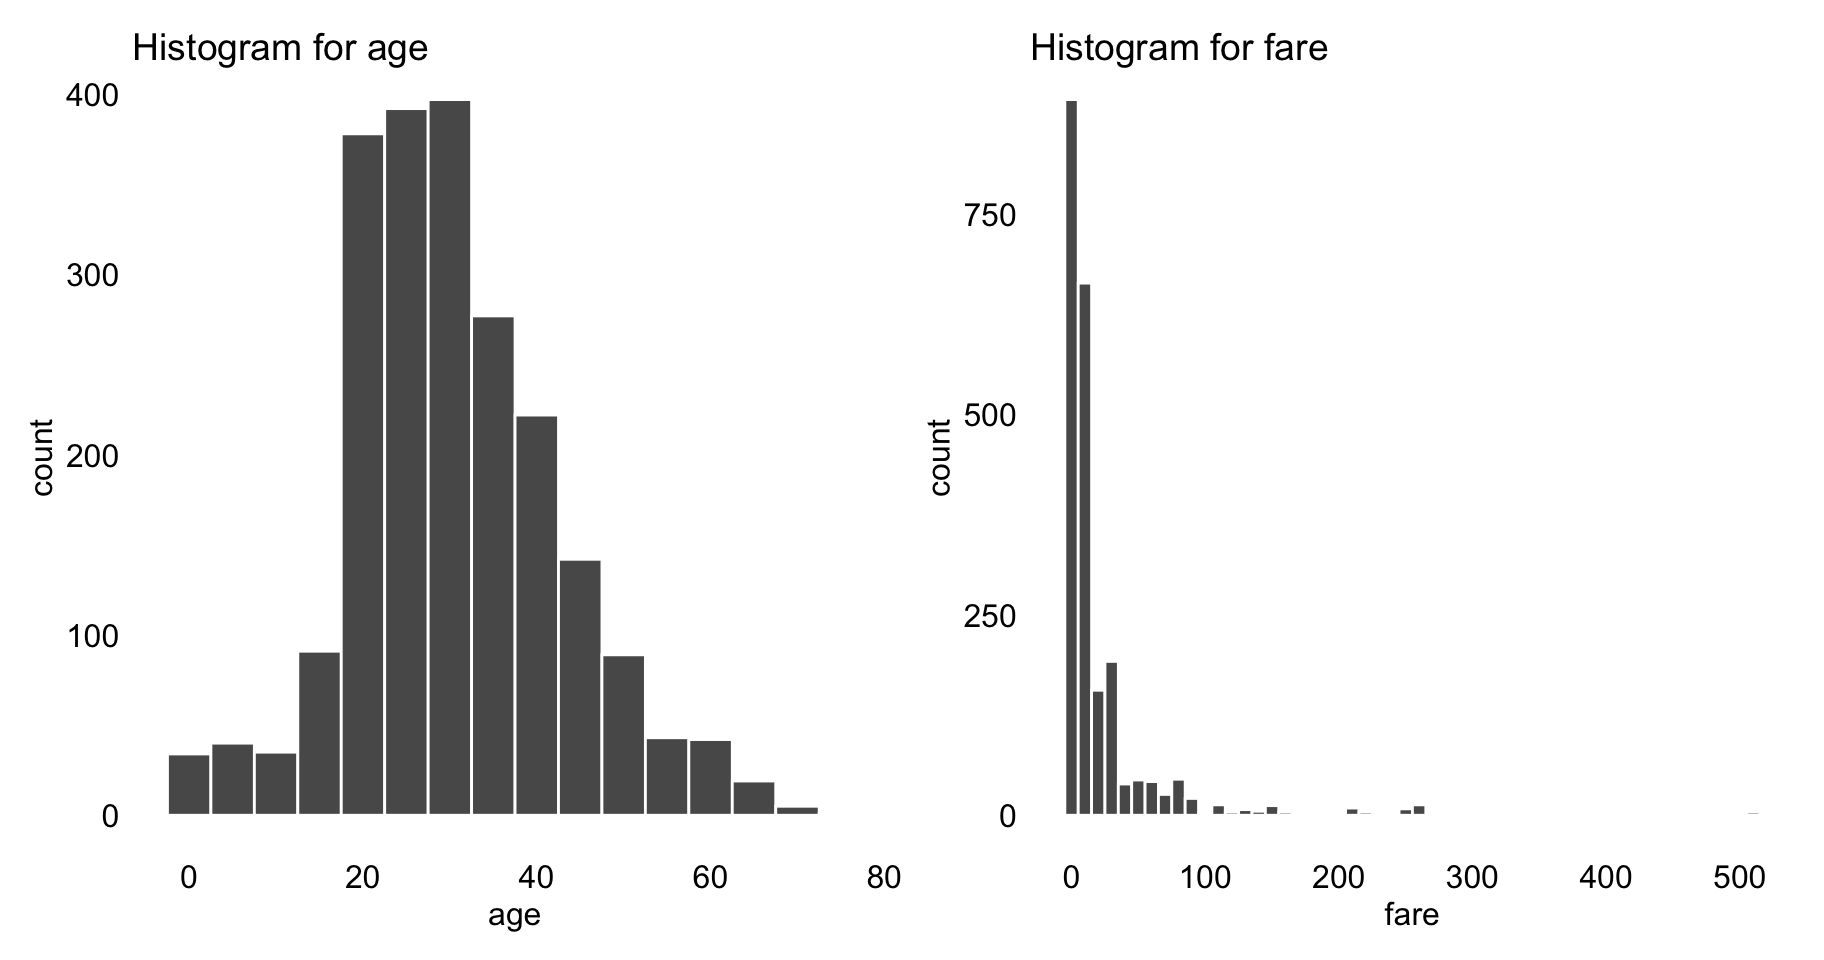 Histograms for variables age and fare from the Titanic data.